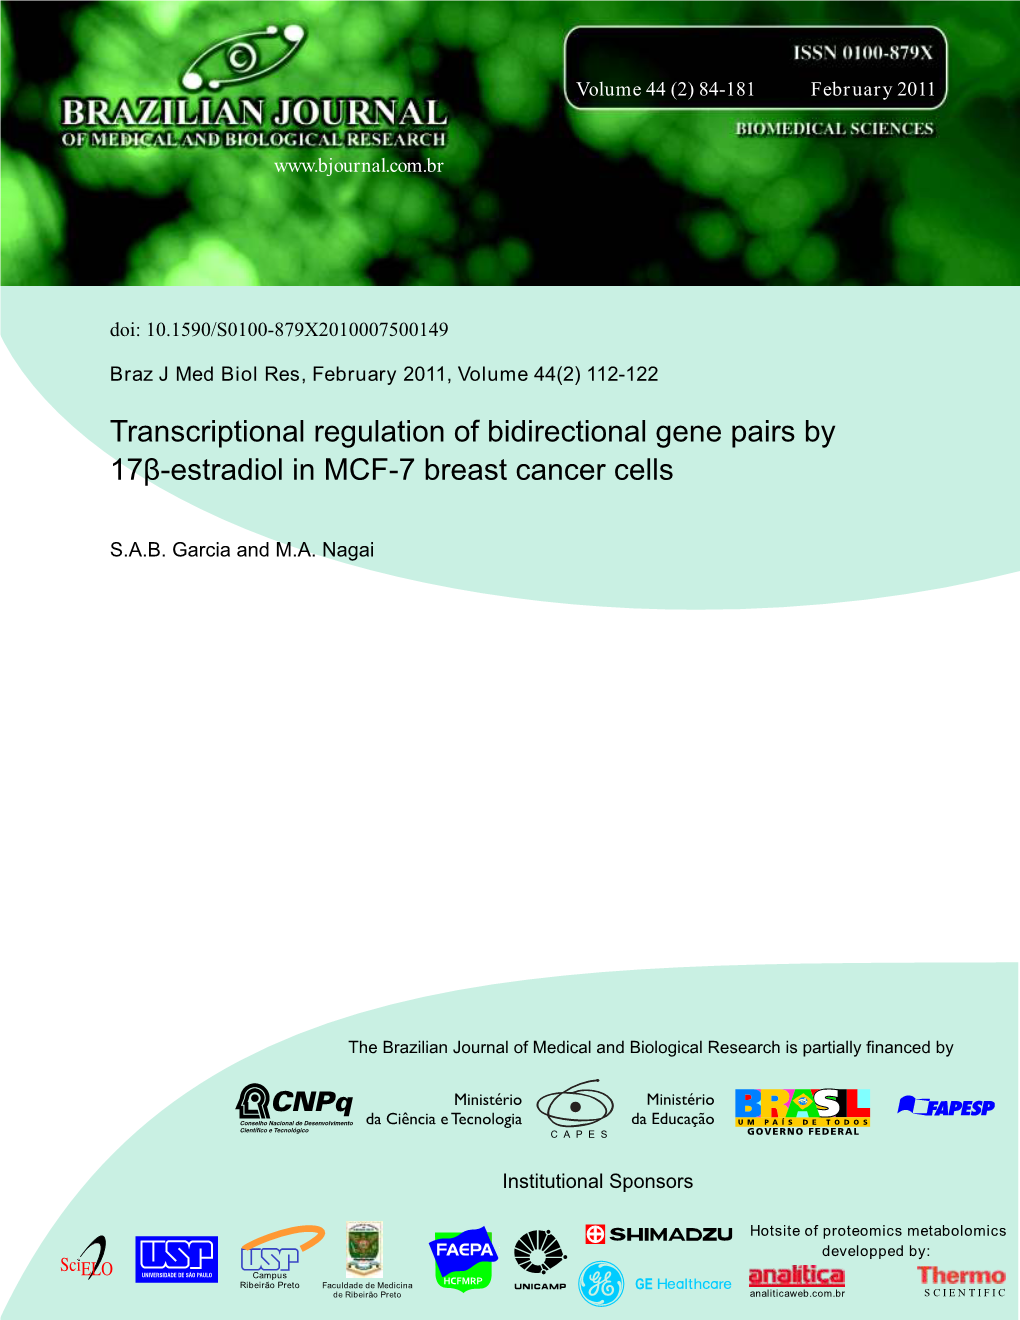 Transcriptional Regulation of Bidirectional Gene Pairs by 17Β-Estradiol in MCF-7 Breast Cancer Cells